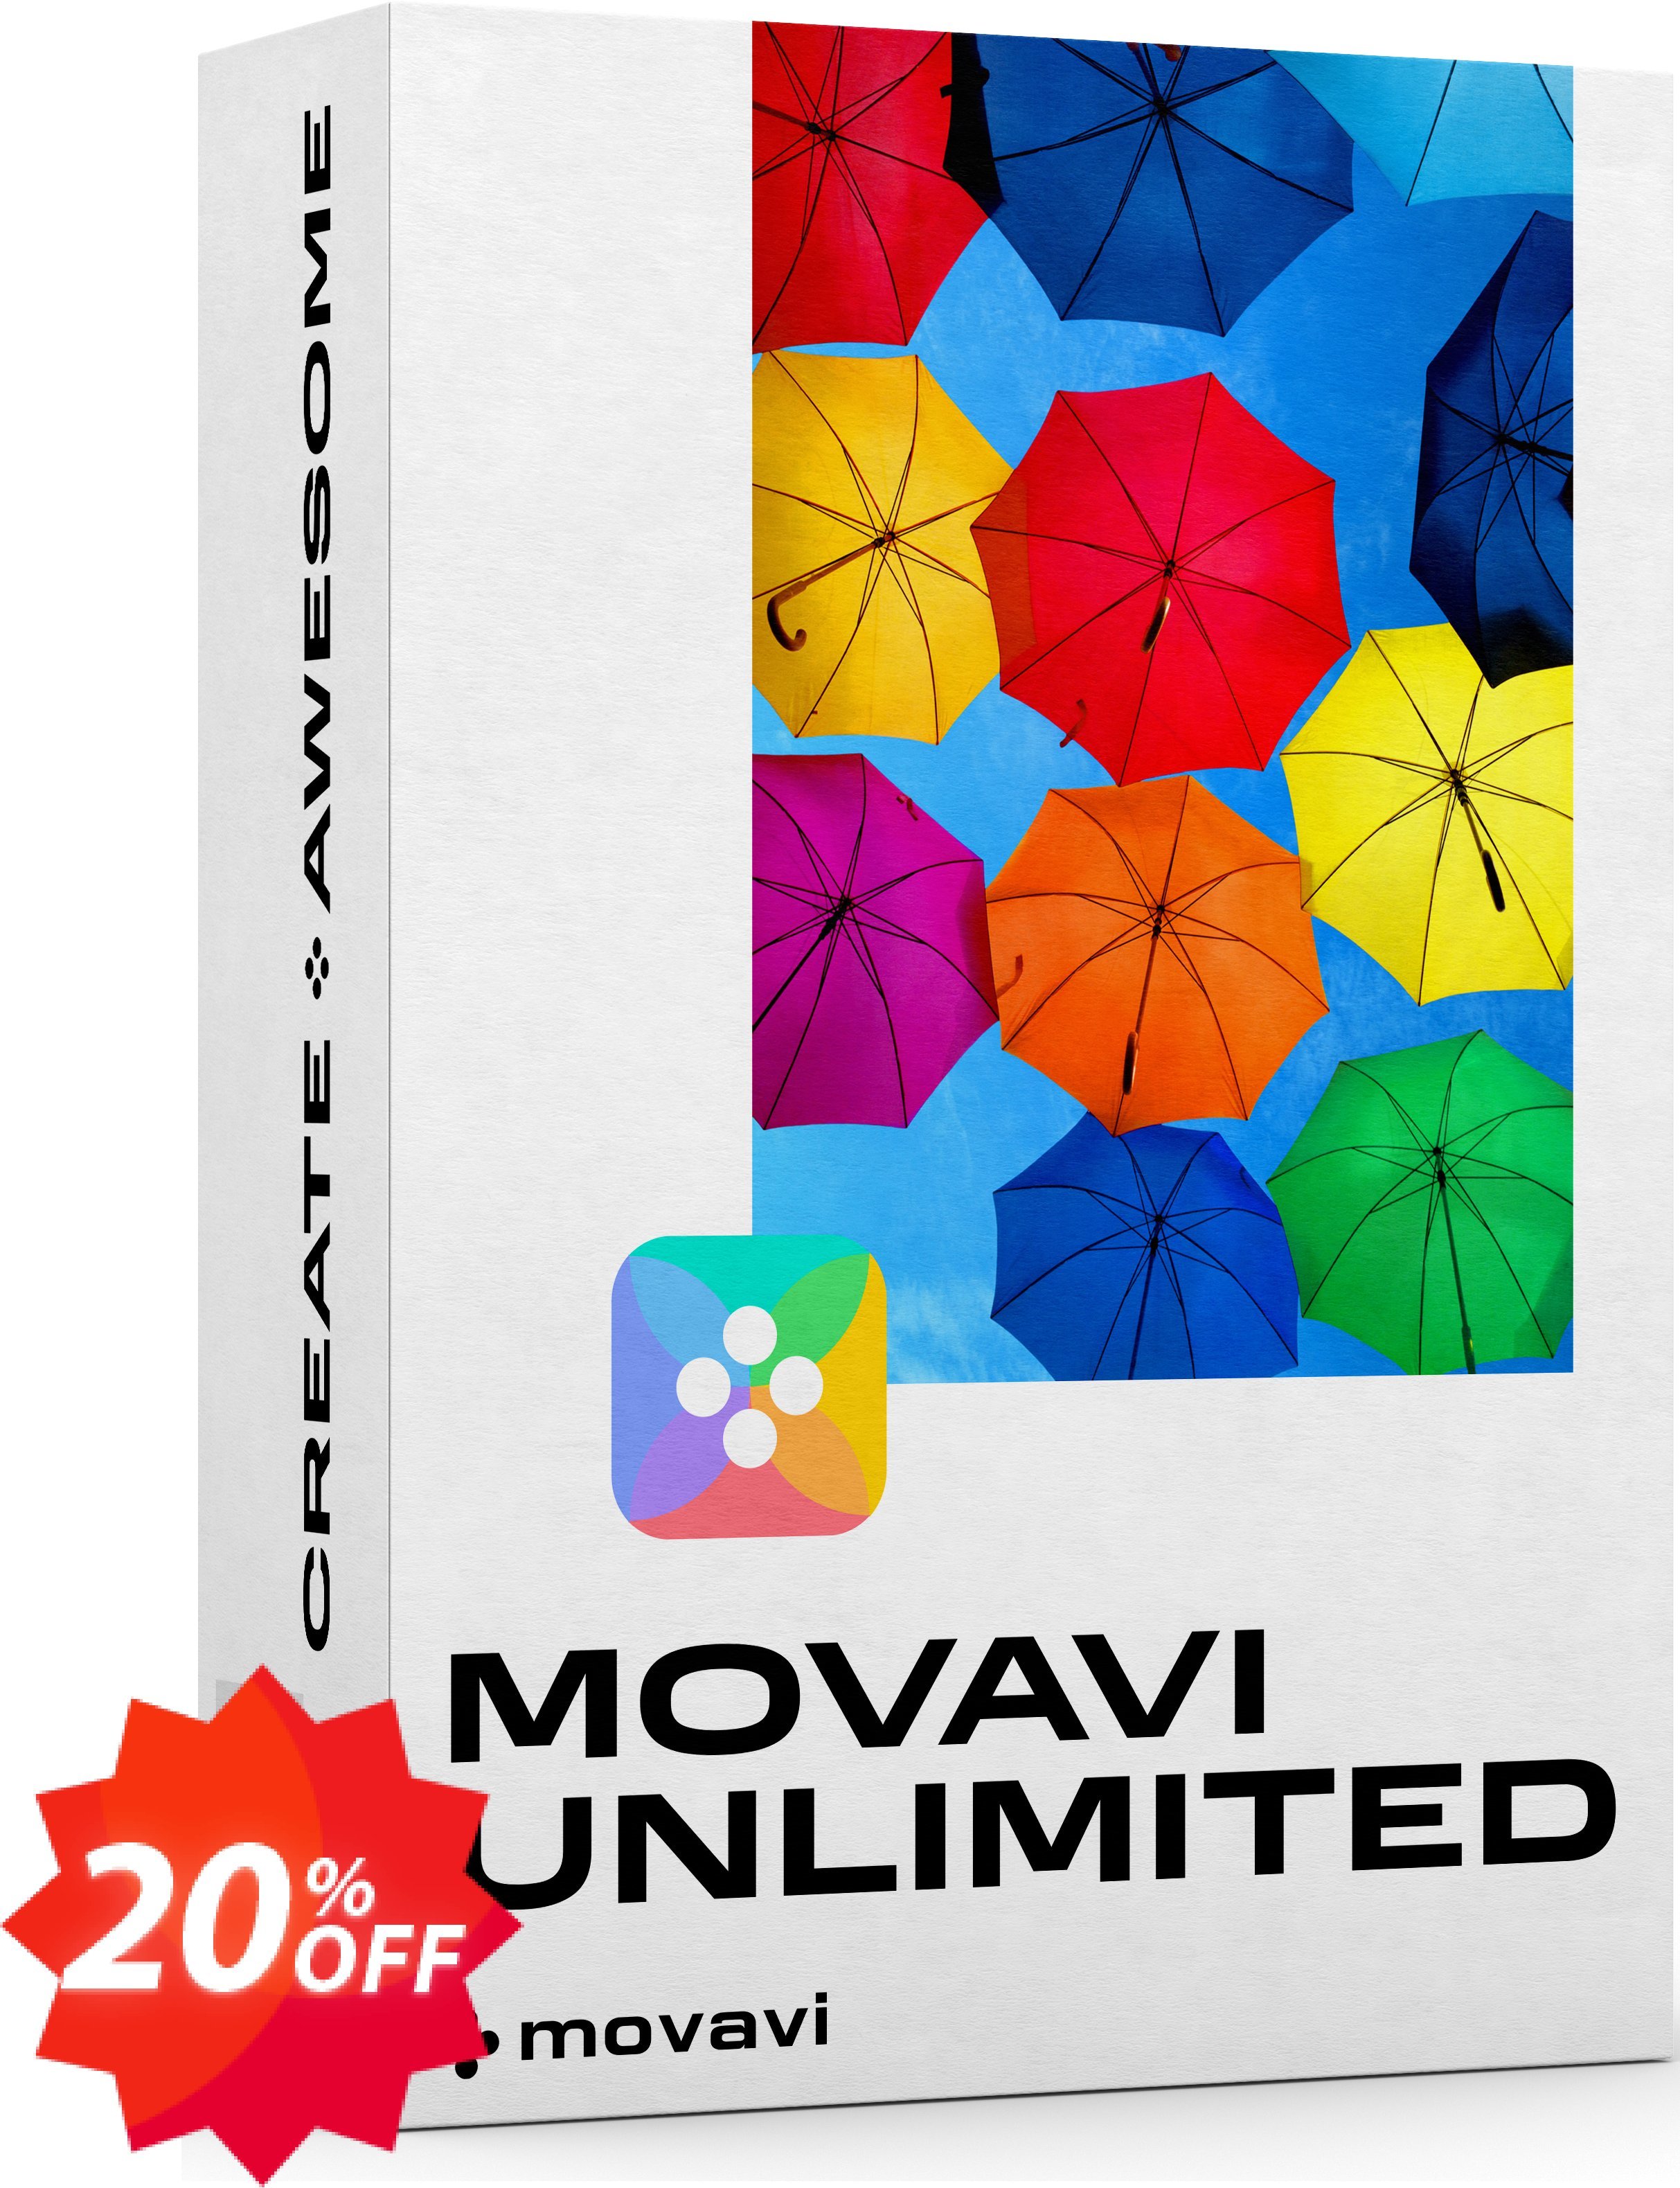 Movavi Unlimited 1-year + Red Lasers Exclusive Pack Coupon code 20% discount 